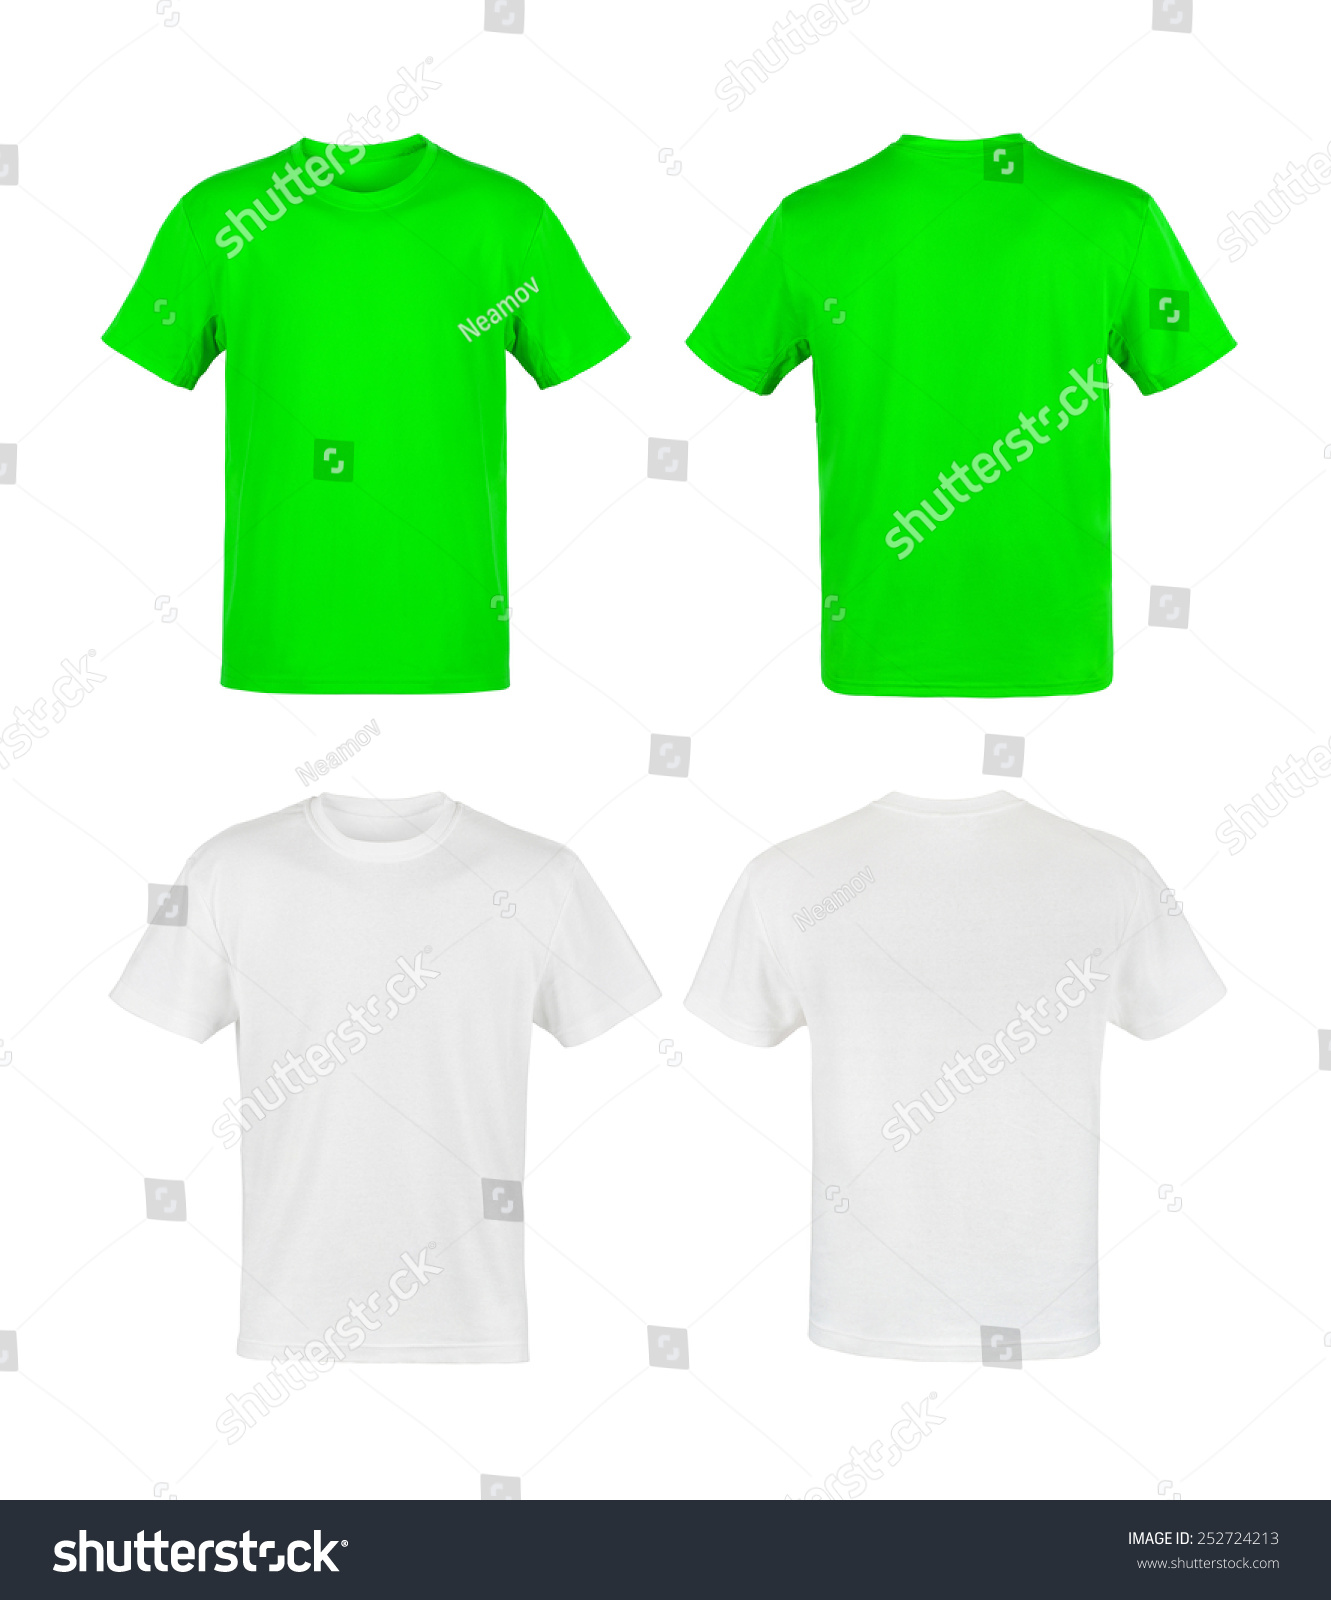 White And Green Shirts Isolated On White Stock Photo 252724213 ...